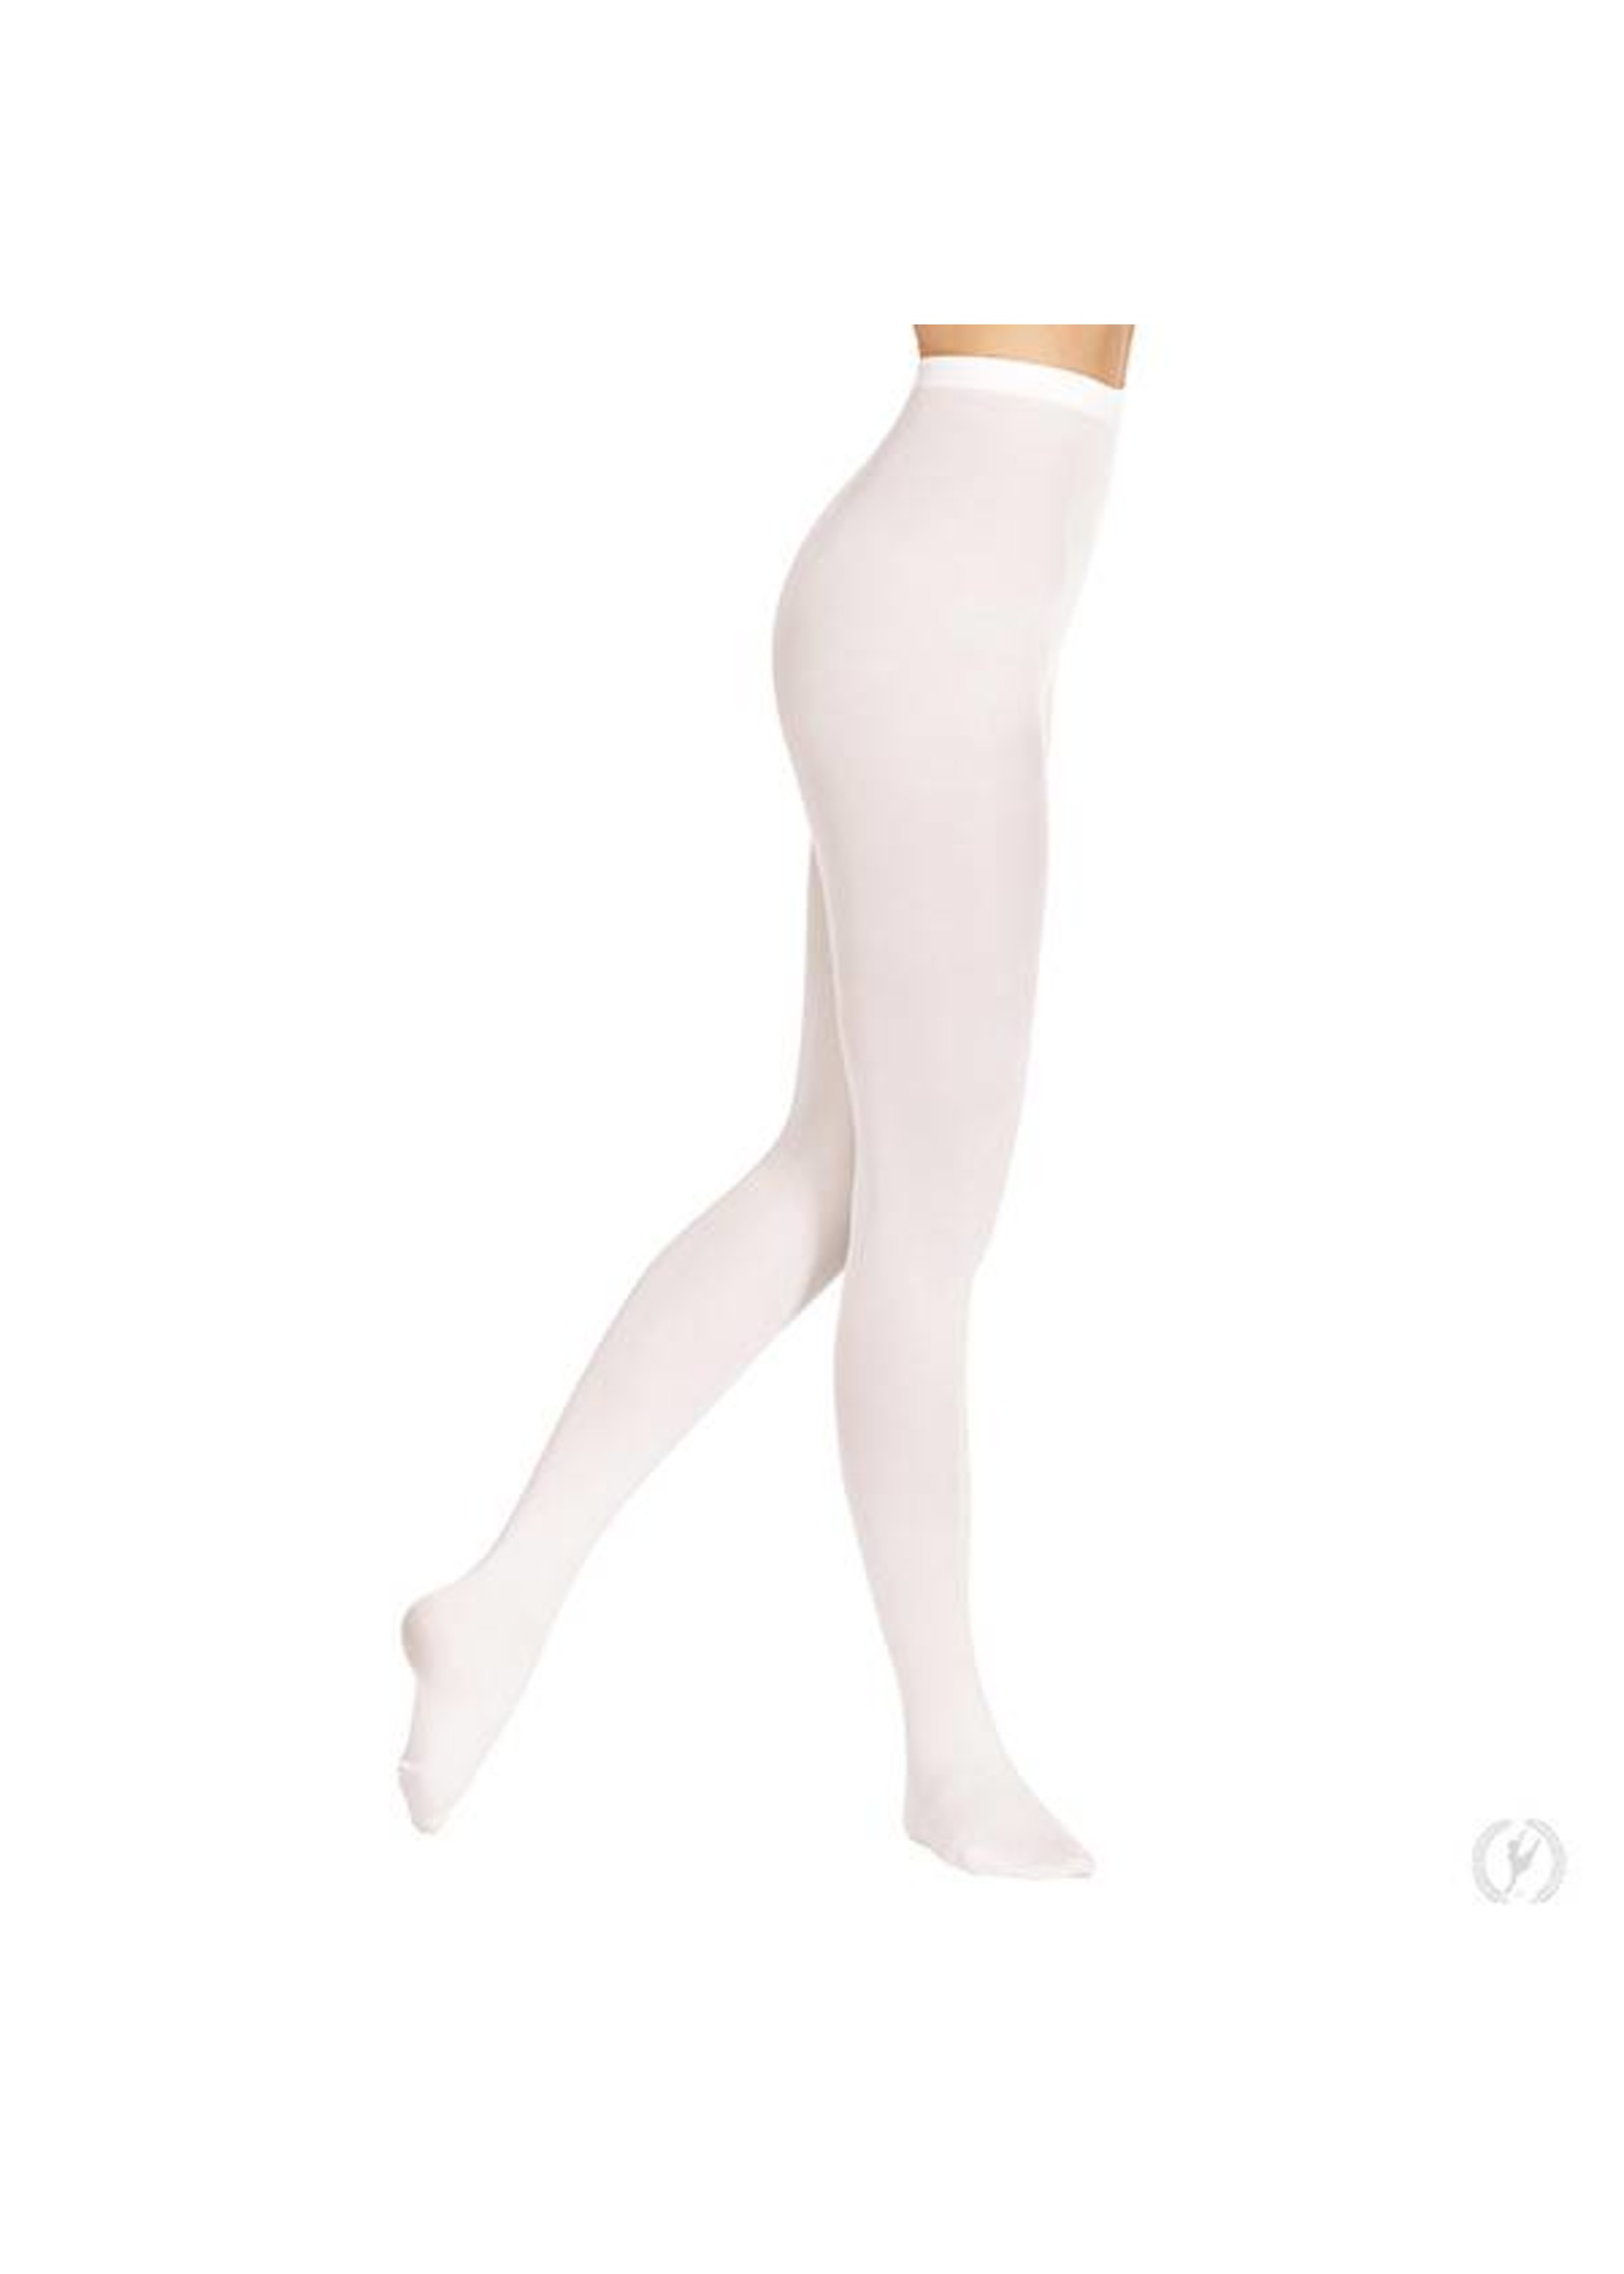 215 NR FOOTED TIGHTS WHITE